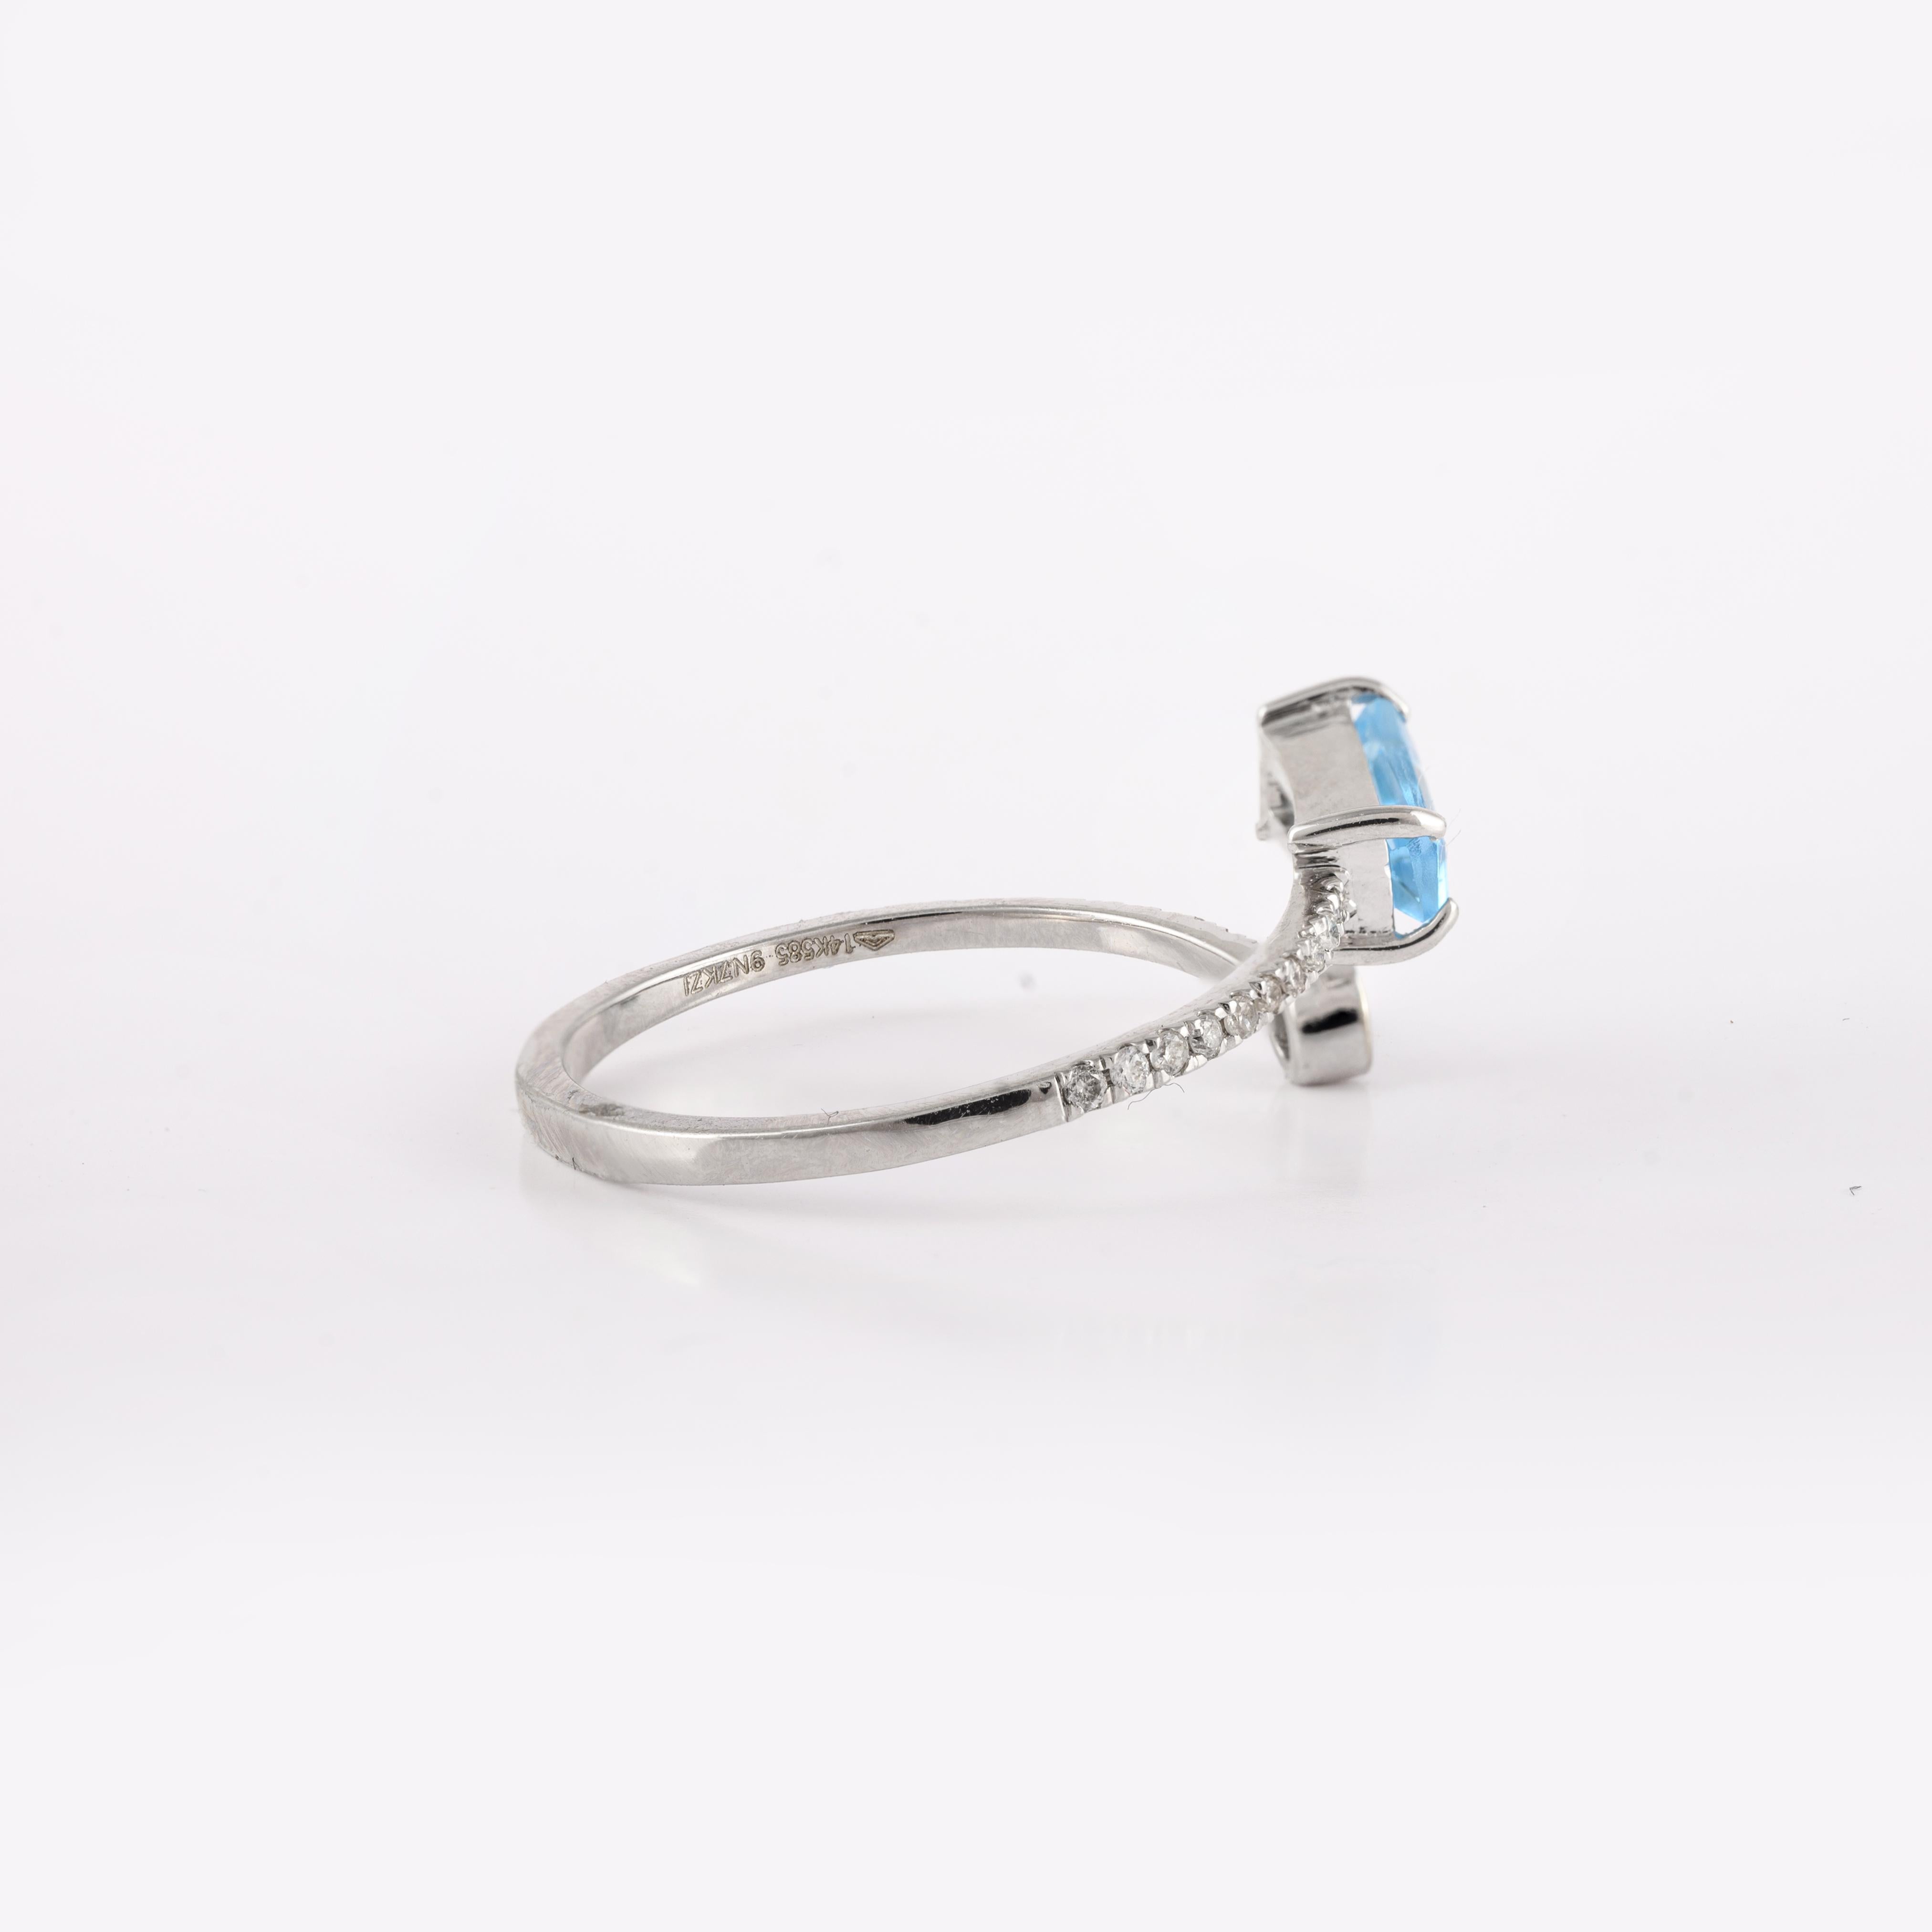 For Sale:  Blue Topaz and Diamond Wrap Ring For Her in 14kt Solid White Gold 4